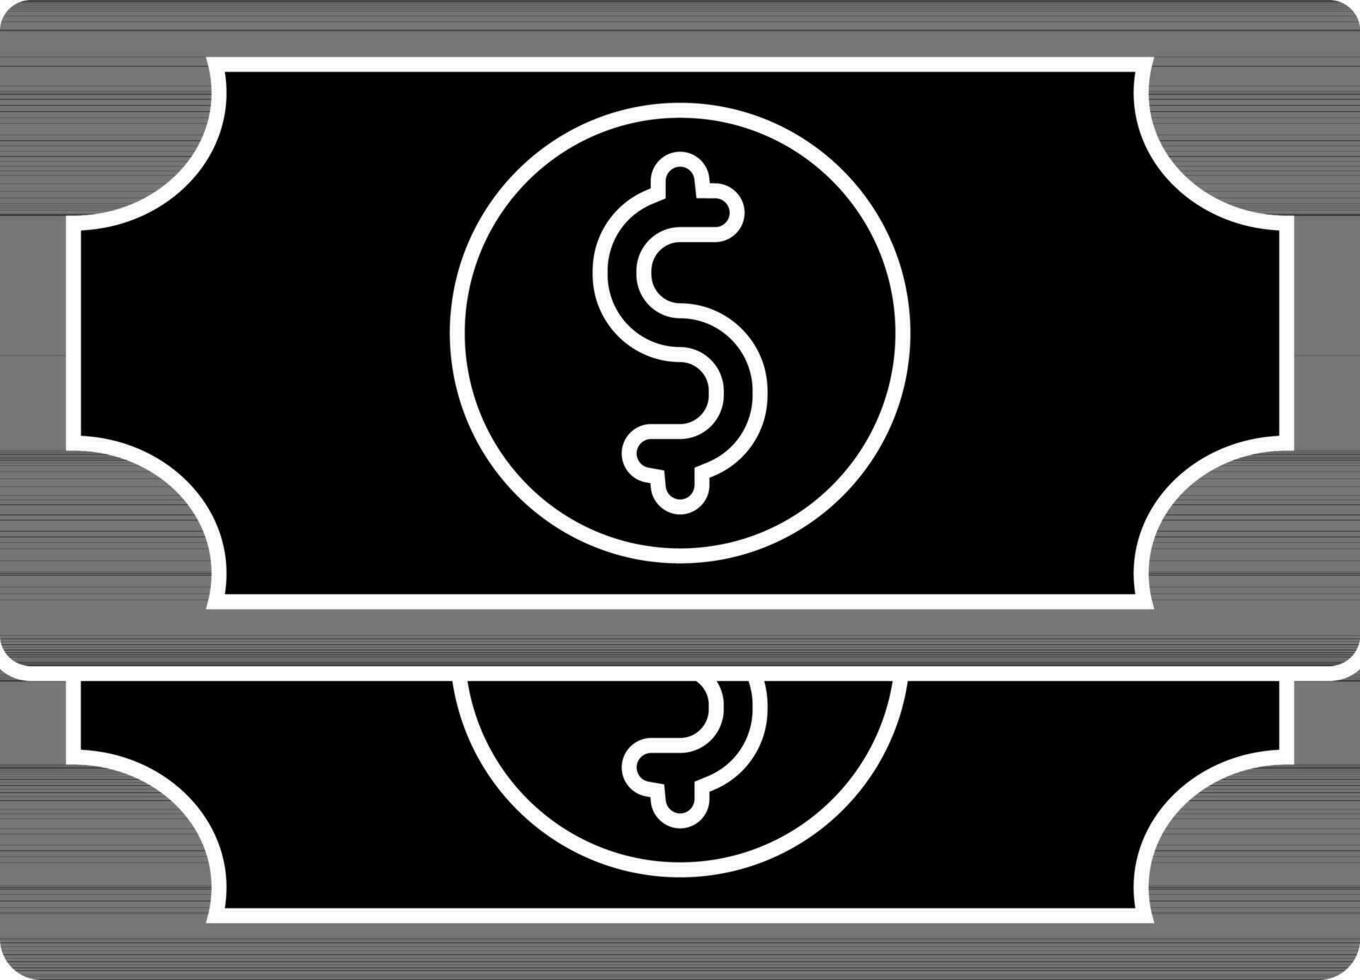 Flat style banknote icon in black and white color. vector